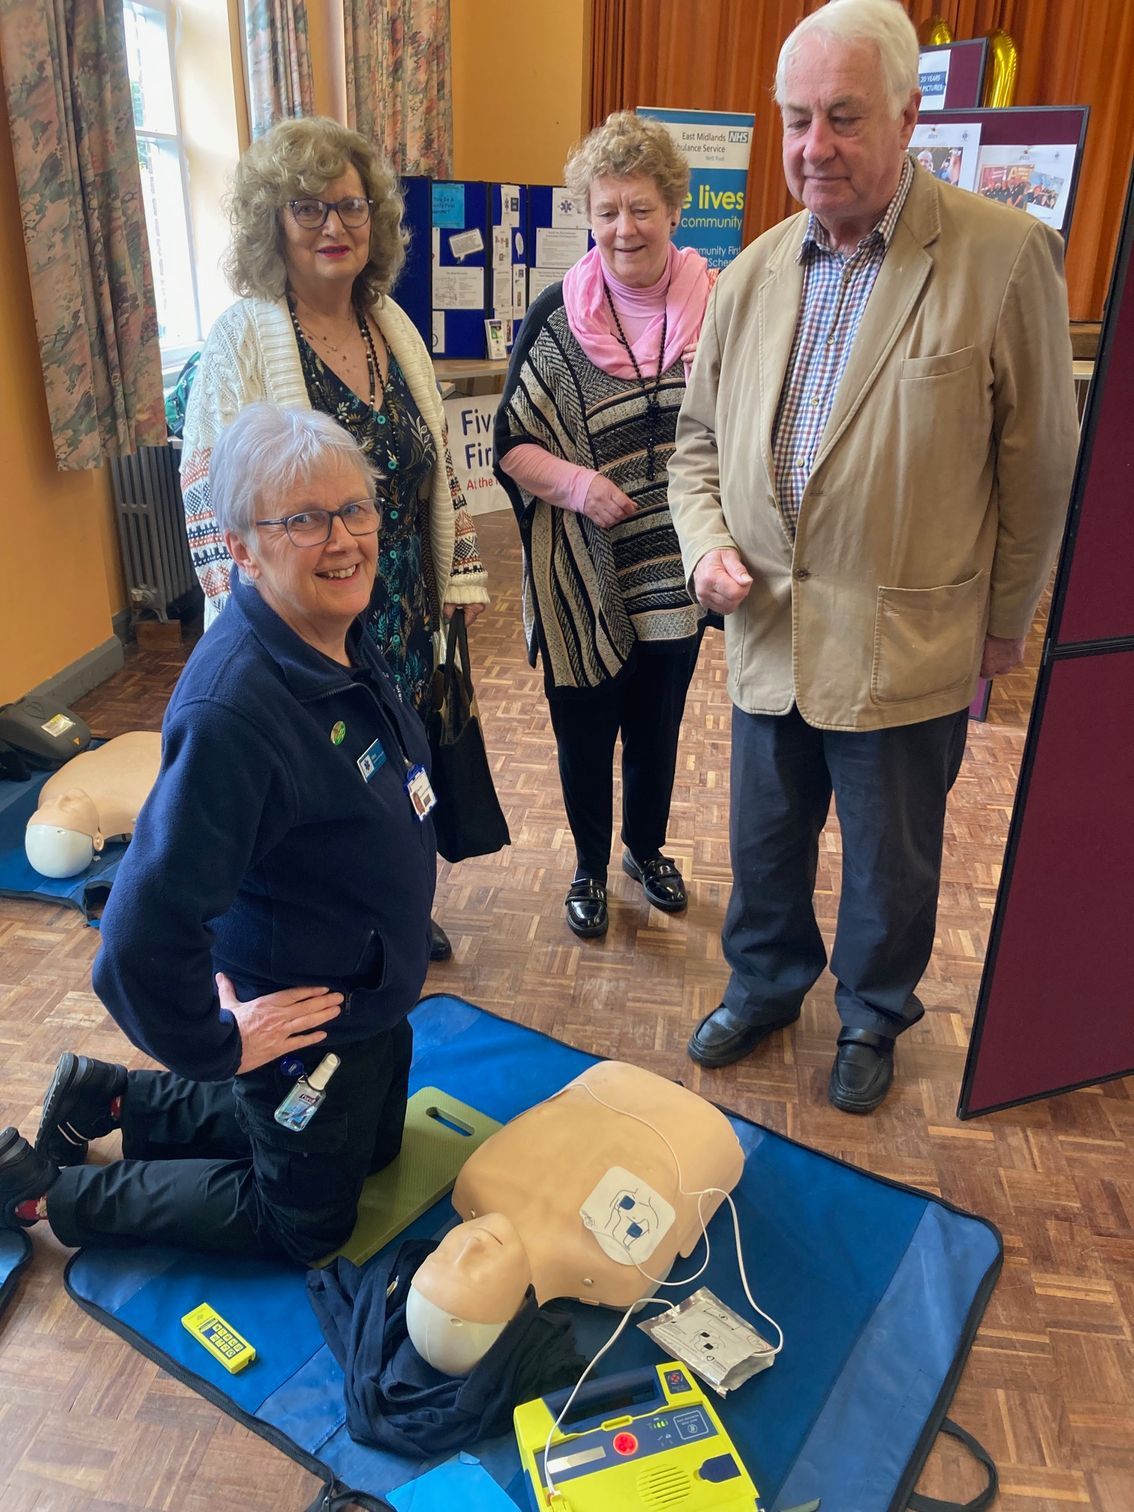 Community Responder, Mary Riches, shows members of the public including Cllr Hazel Brand, how to perform CPR and use a defibrillator.